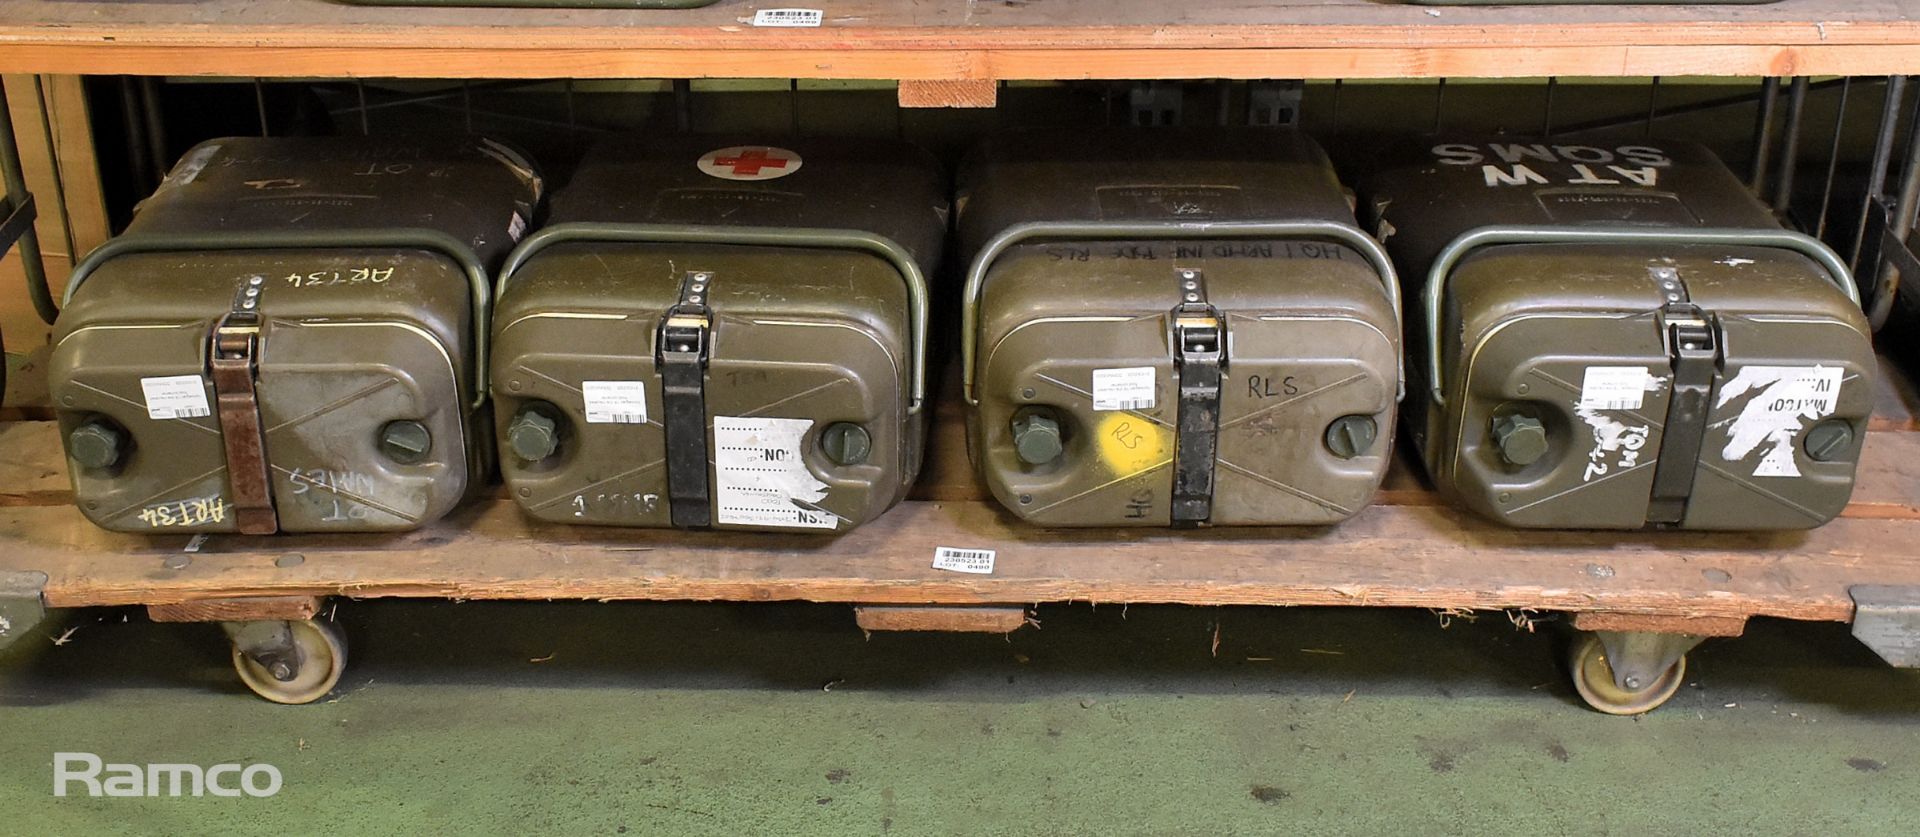 4x Norwegian 18 litre insulated food containers